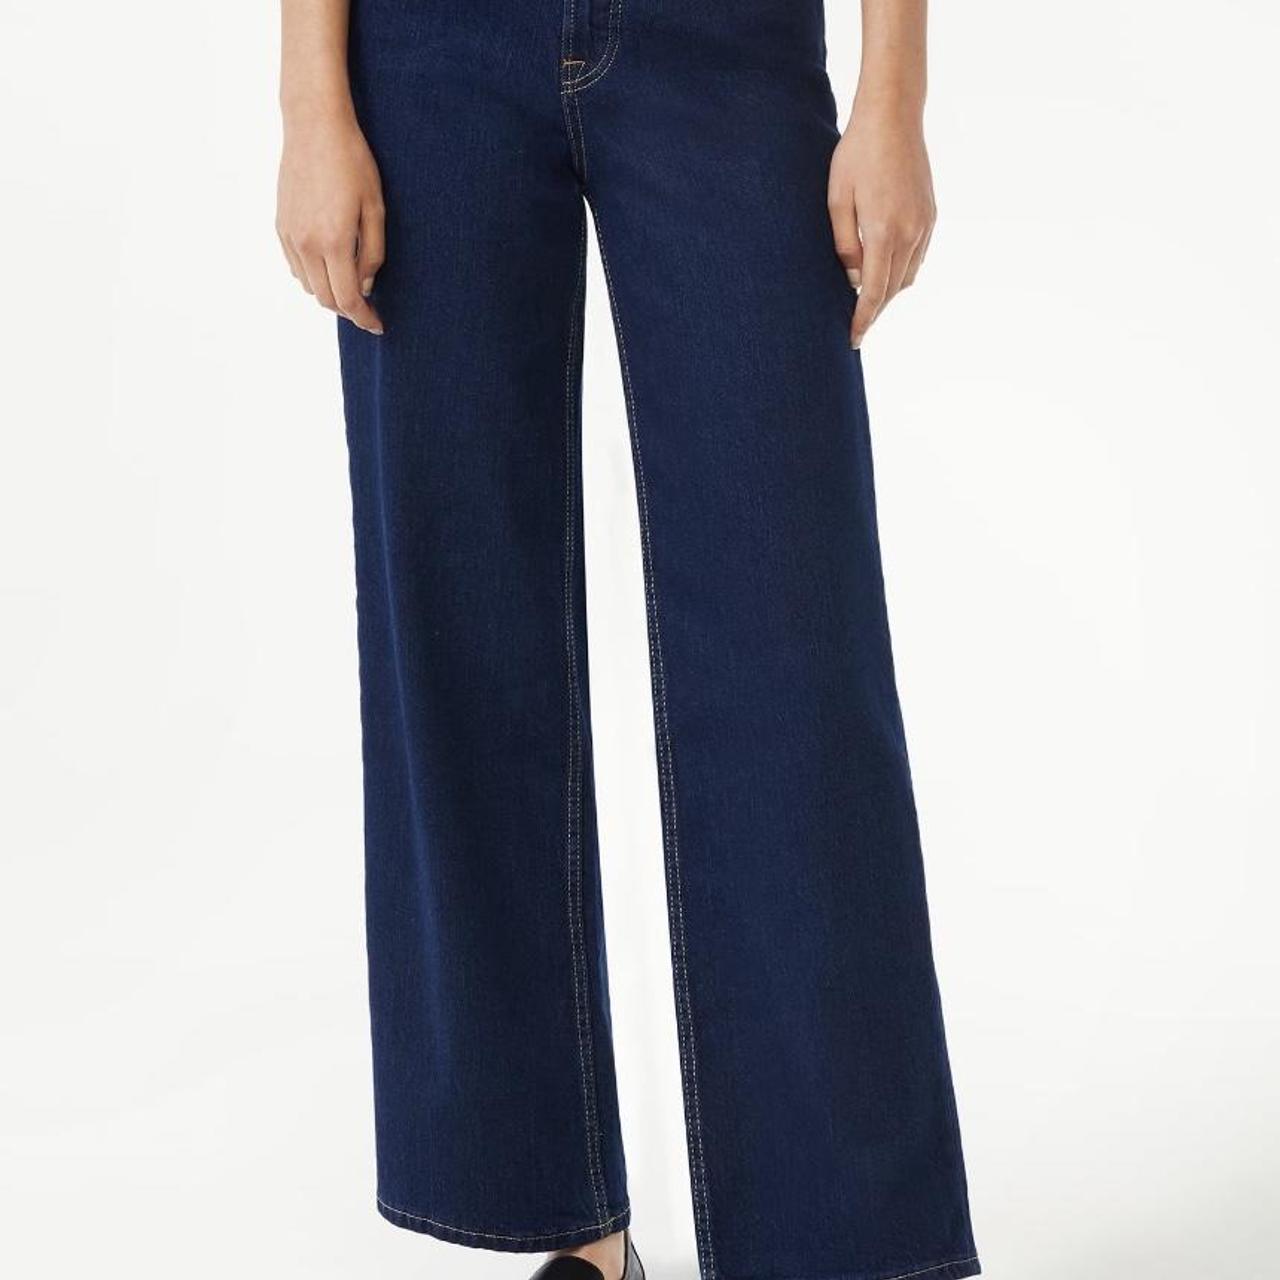 Free Assembly Women's Navy Trousers